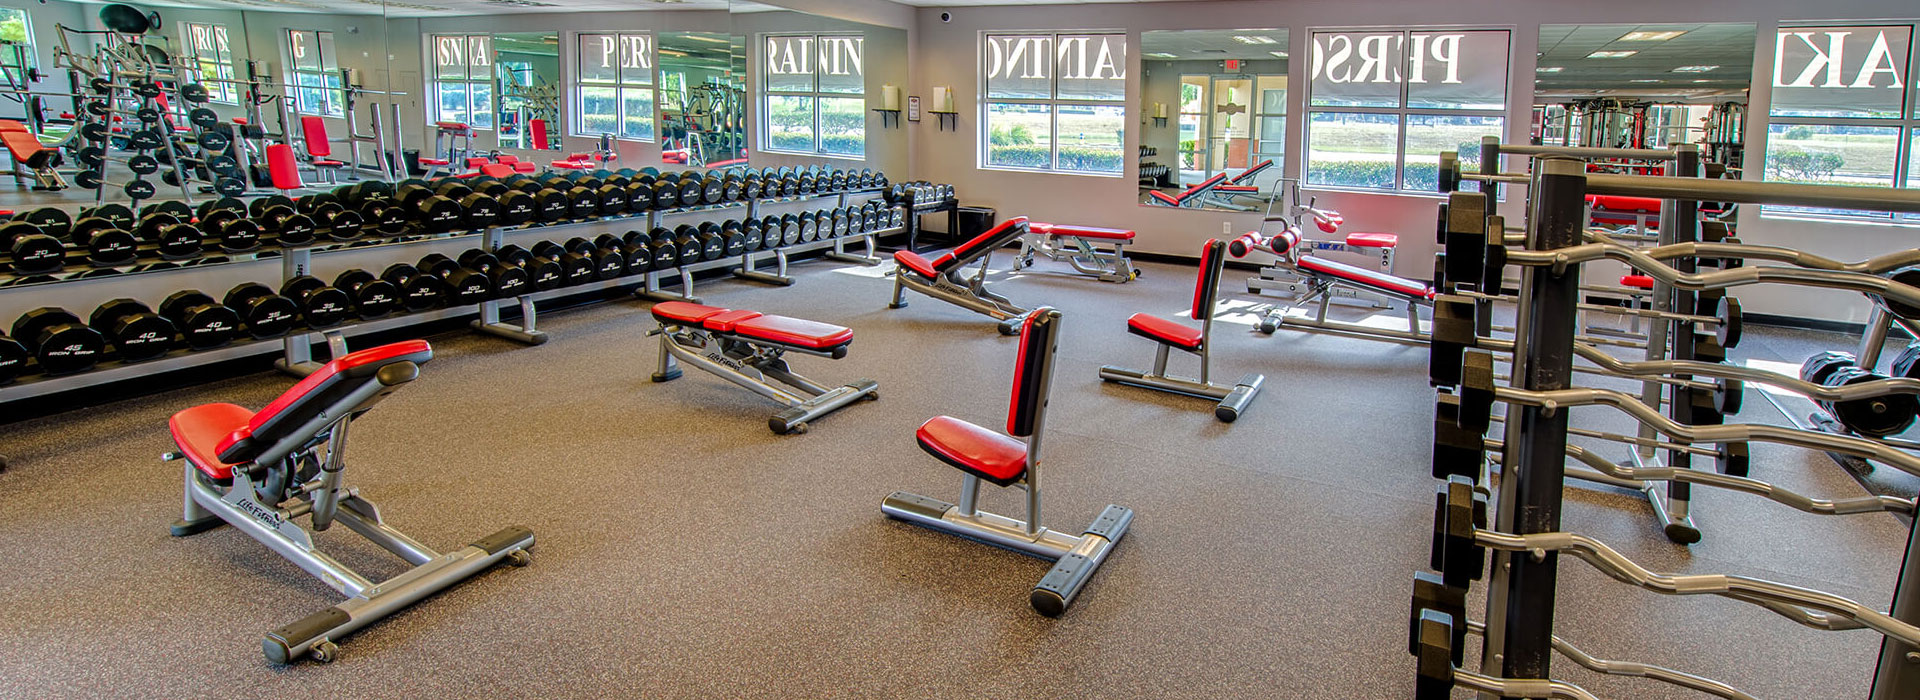 Check Out Our Gym Near You In Land O'Lakes